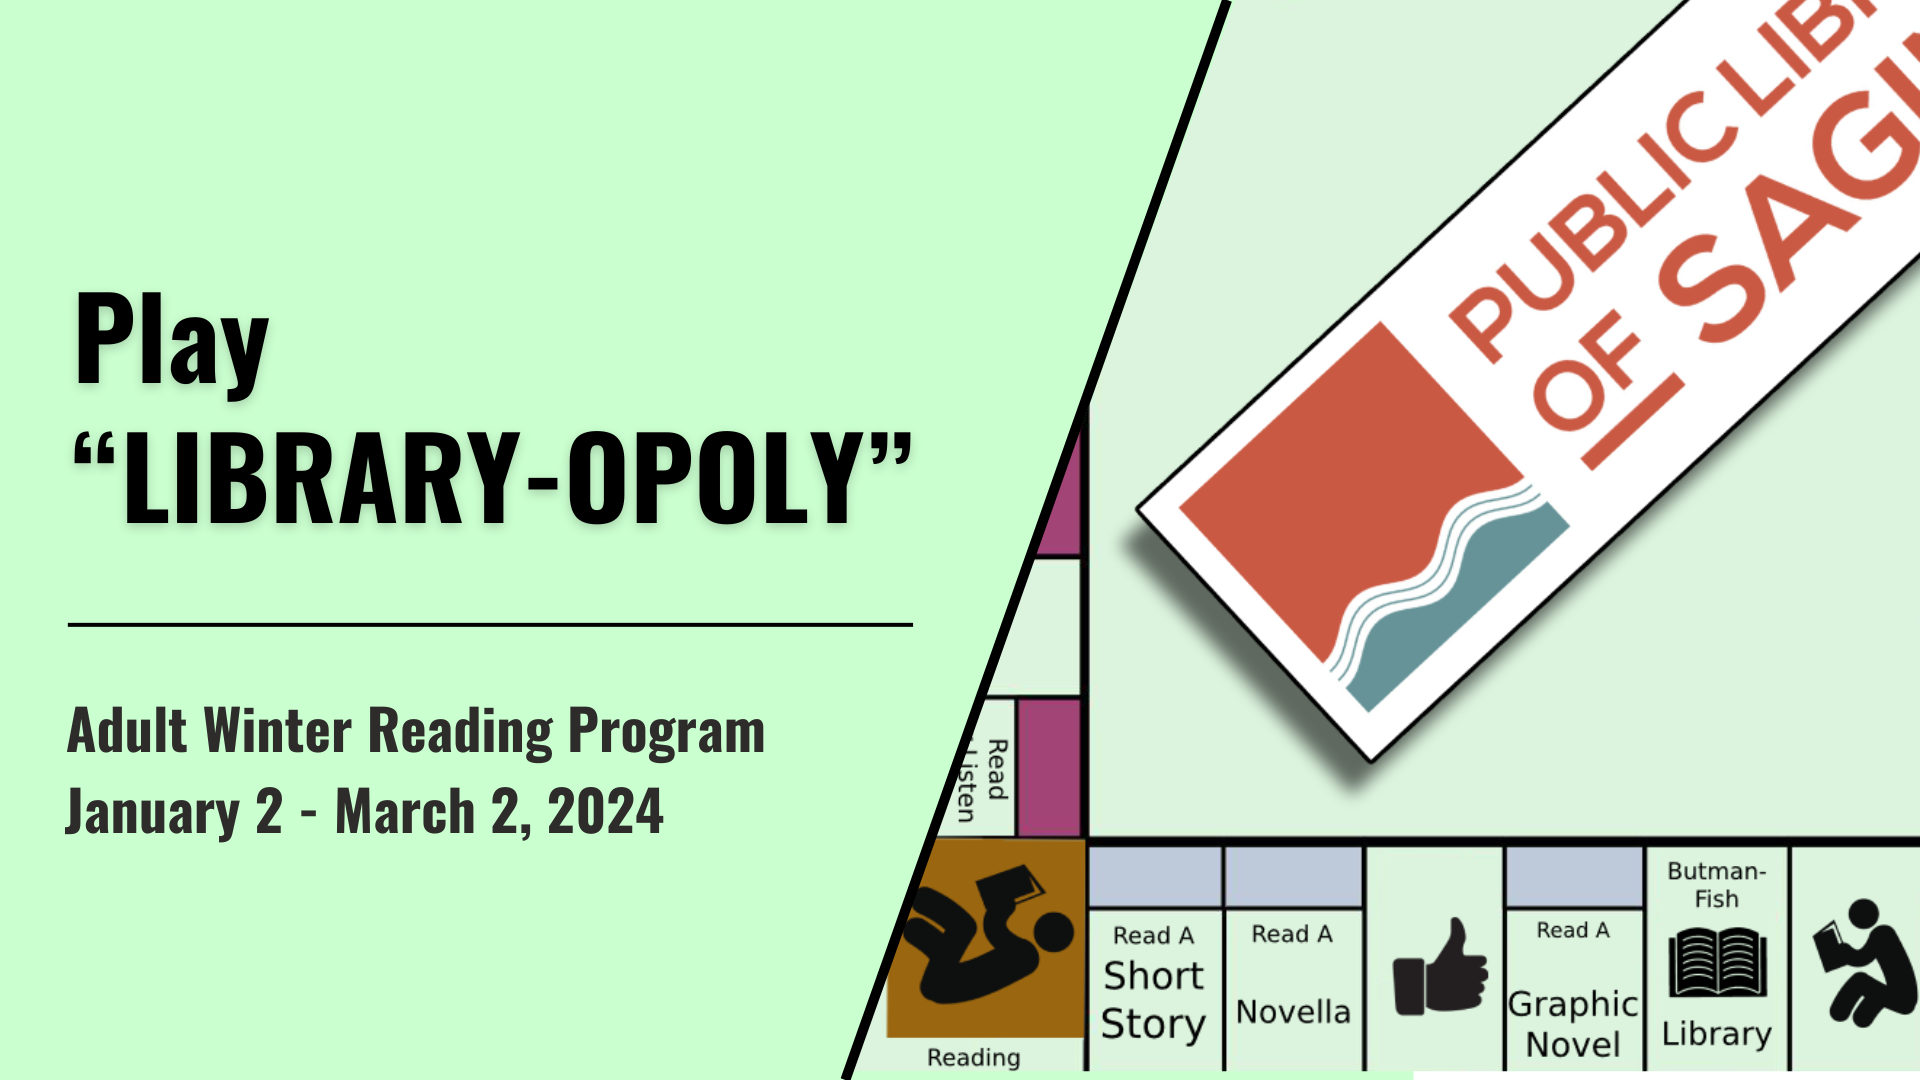 Play "LIBRARY-OPOLY" - Adult Winter Reading Program: January 2 - March 2, 2024